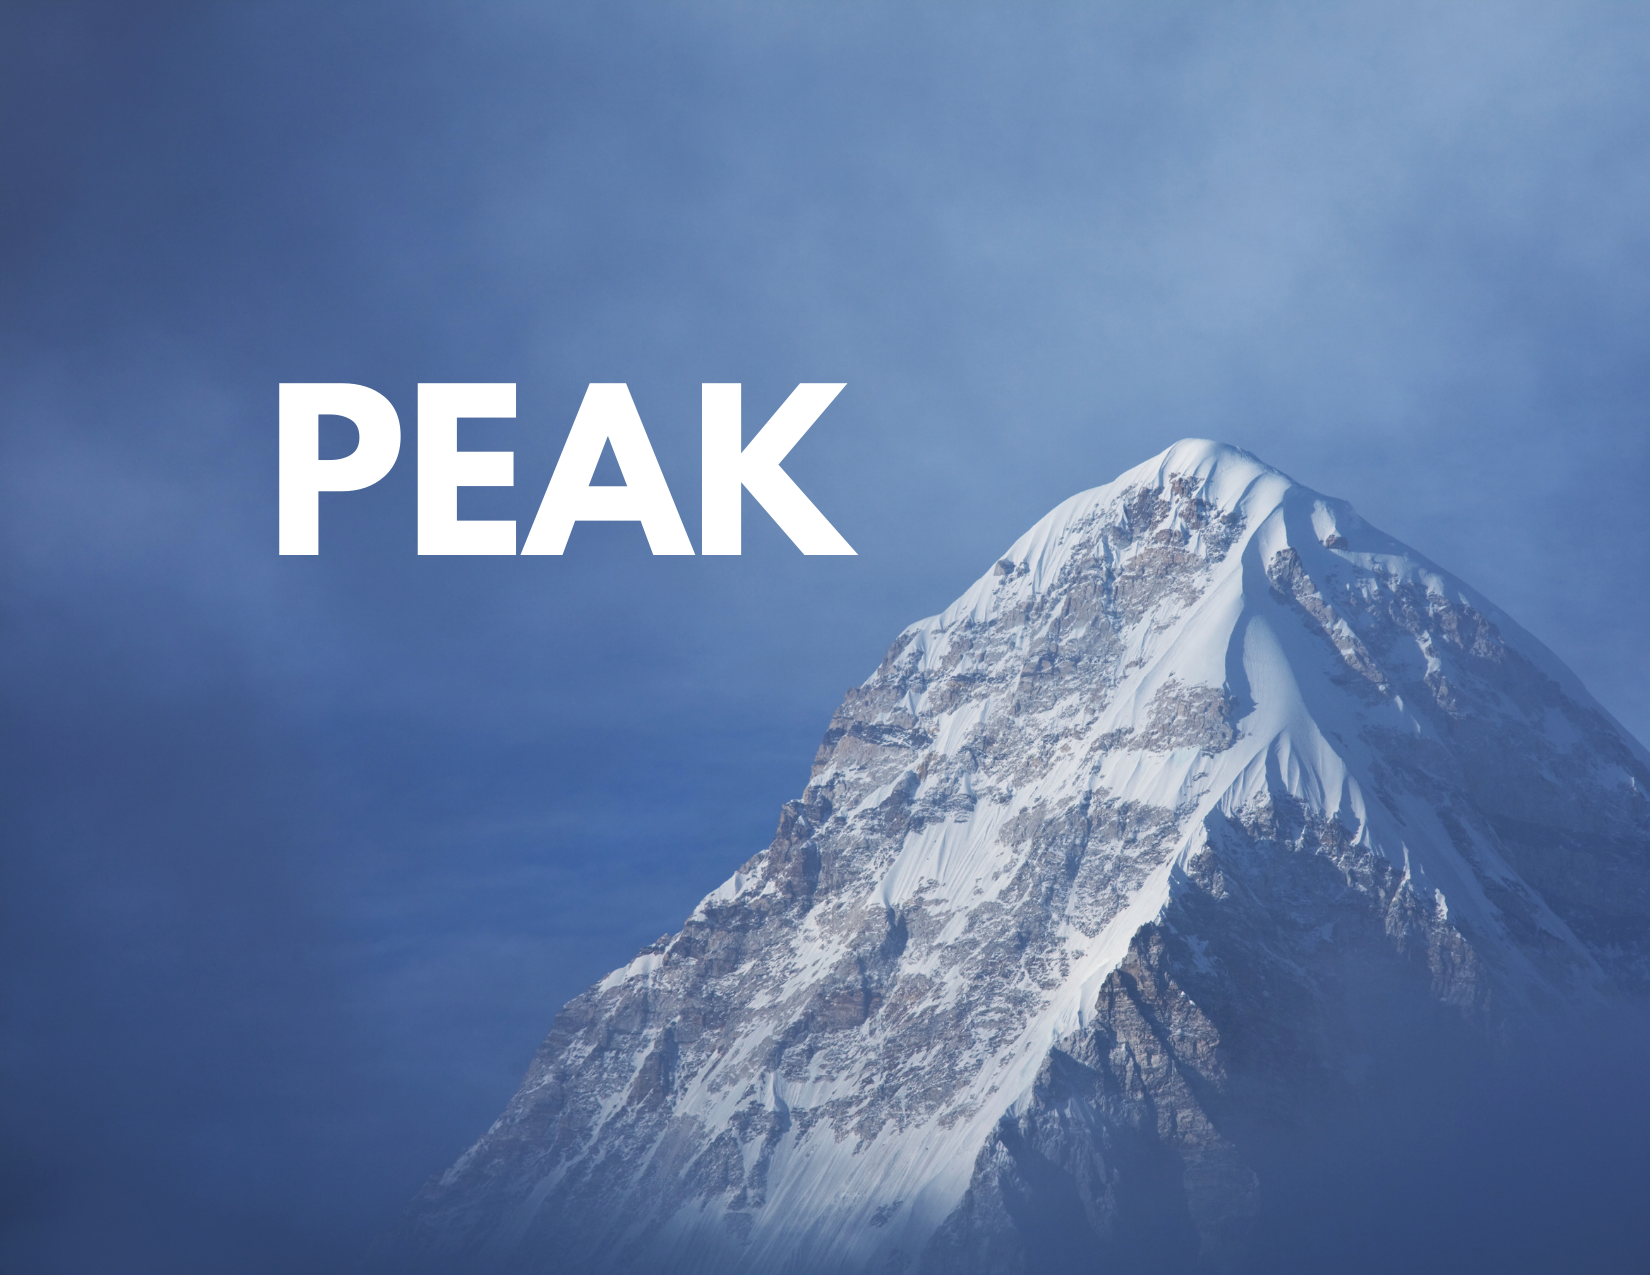 A picture of a mountain peak with the caption 